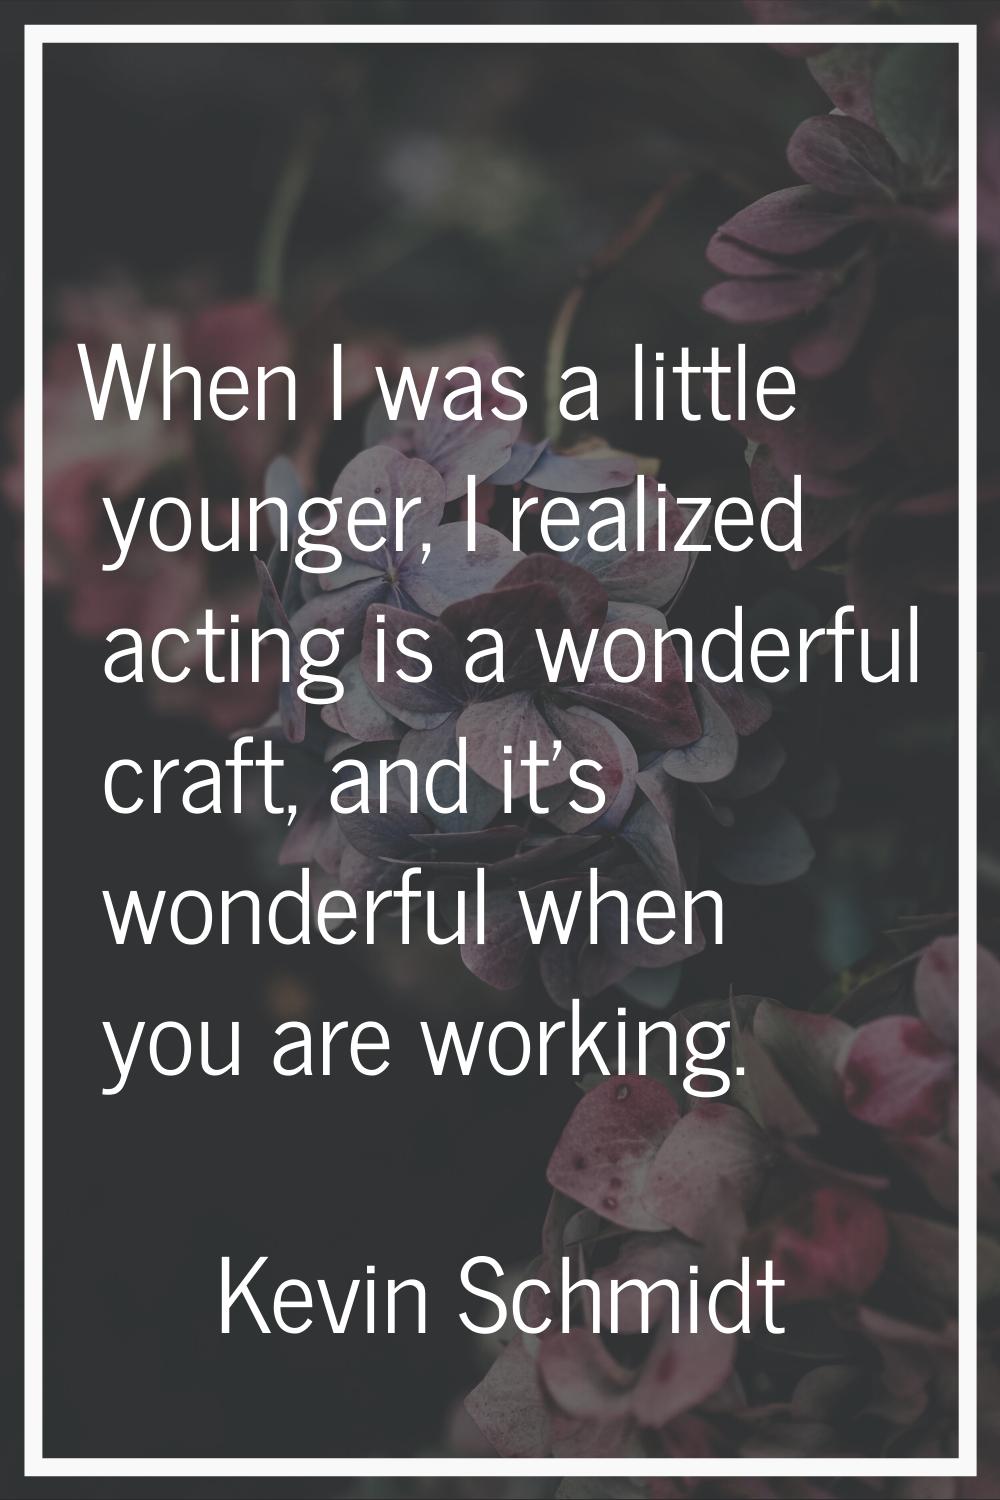 When I was a little younger, I realized acting is a wonderful craft, and it's wonderful when you ar